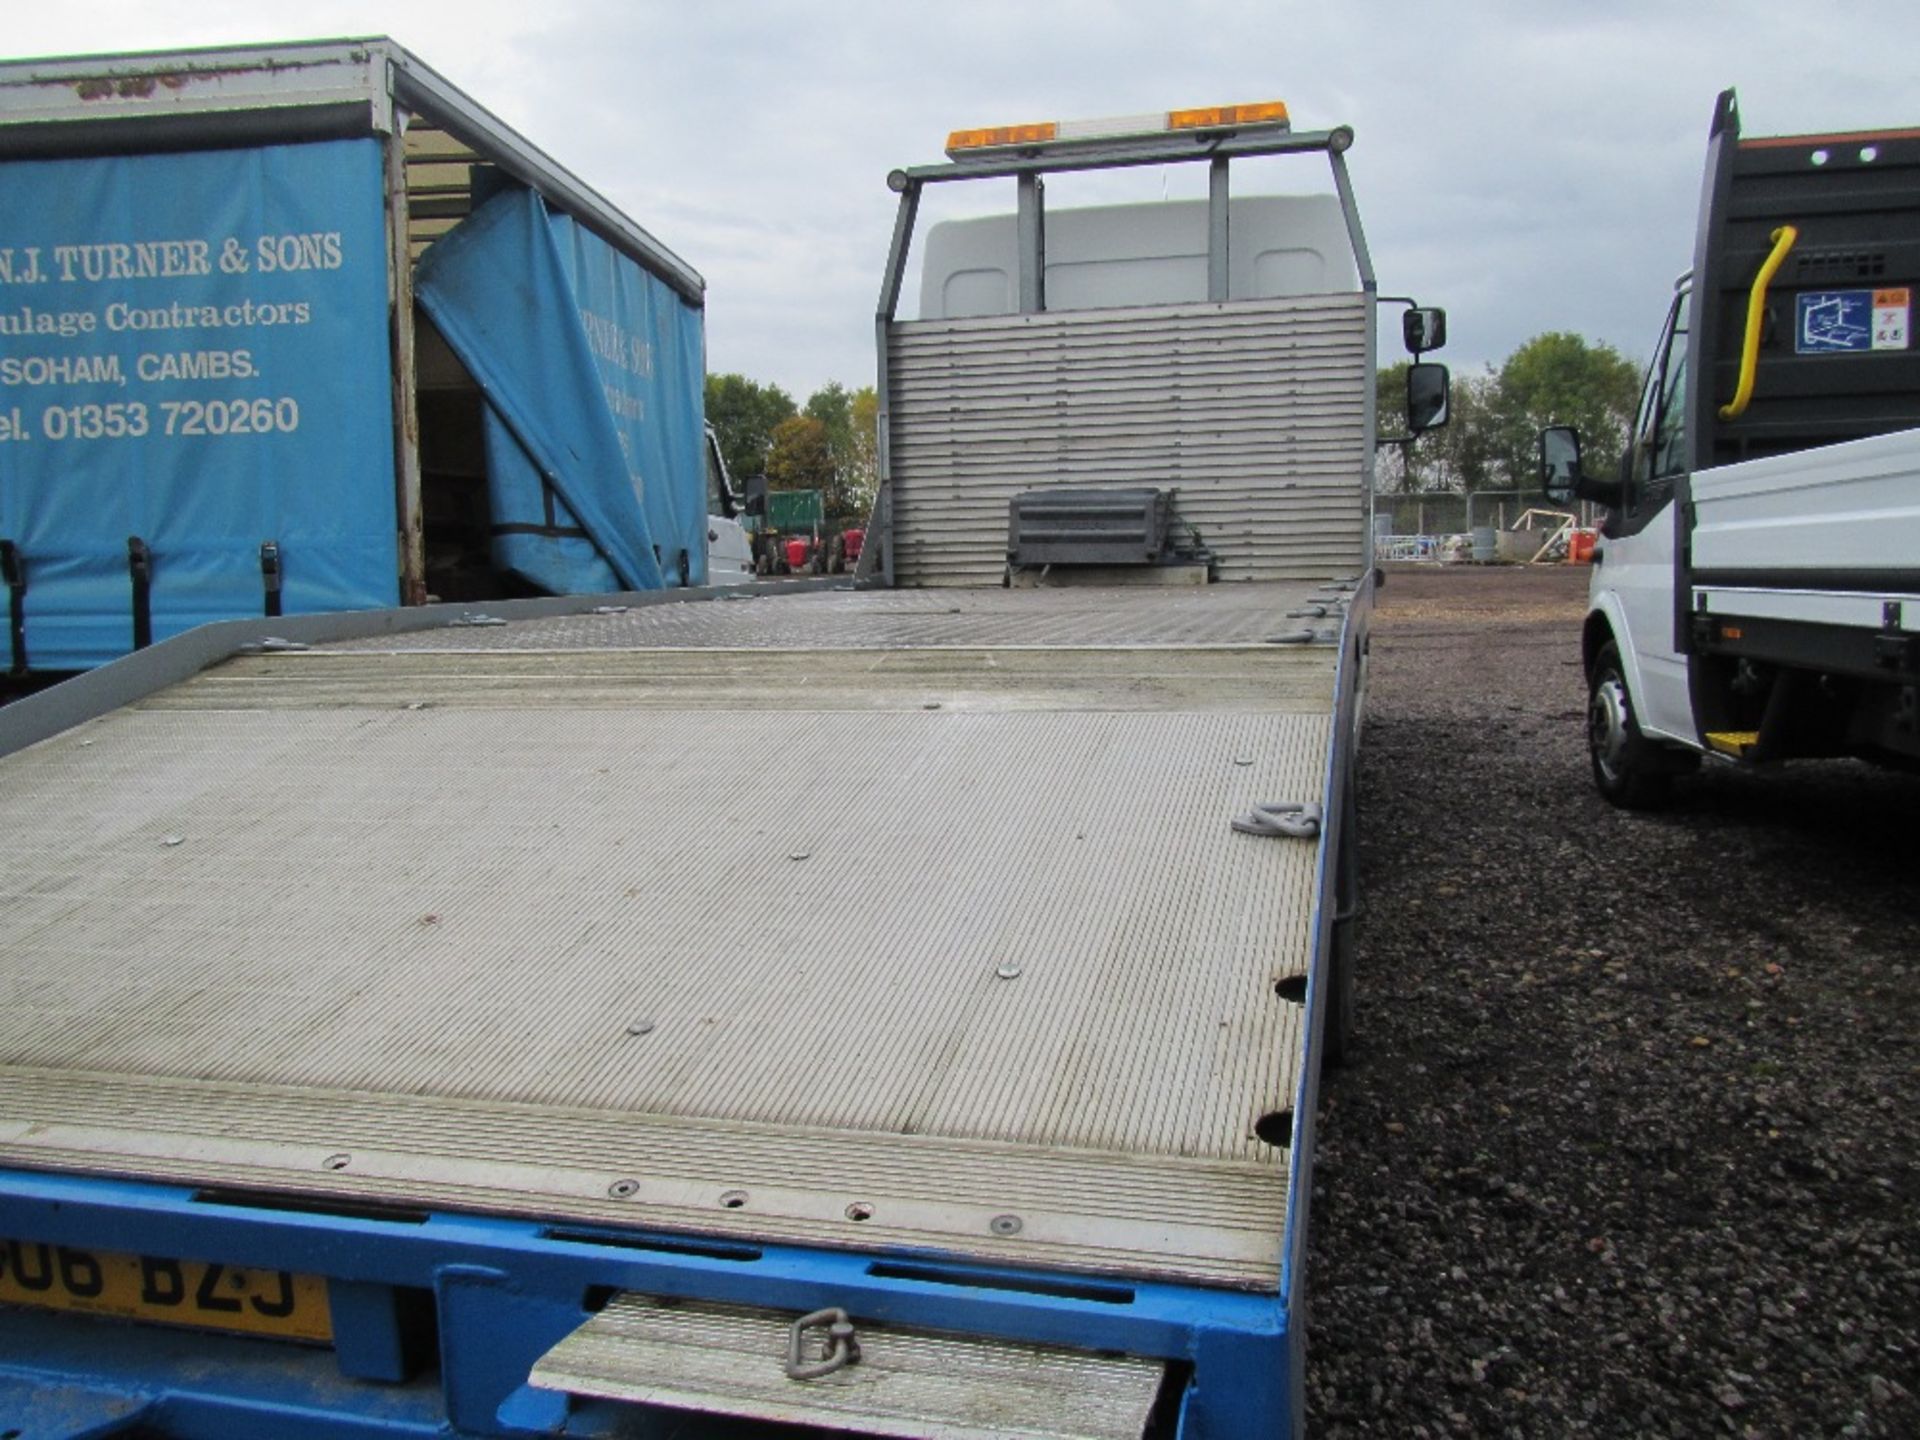 2006 Renault Midlum 180 22ft Plant Beavertail with Sleeper Cab, Alloy Ramps, Winch. Reg Docs will be - Image 4 of 6